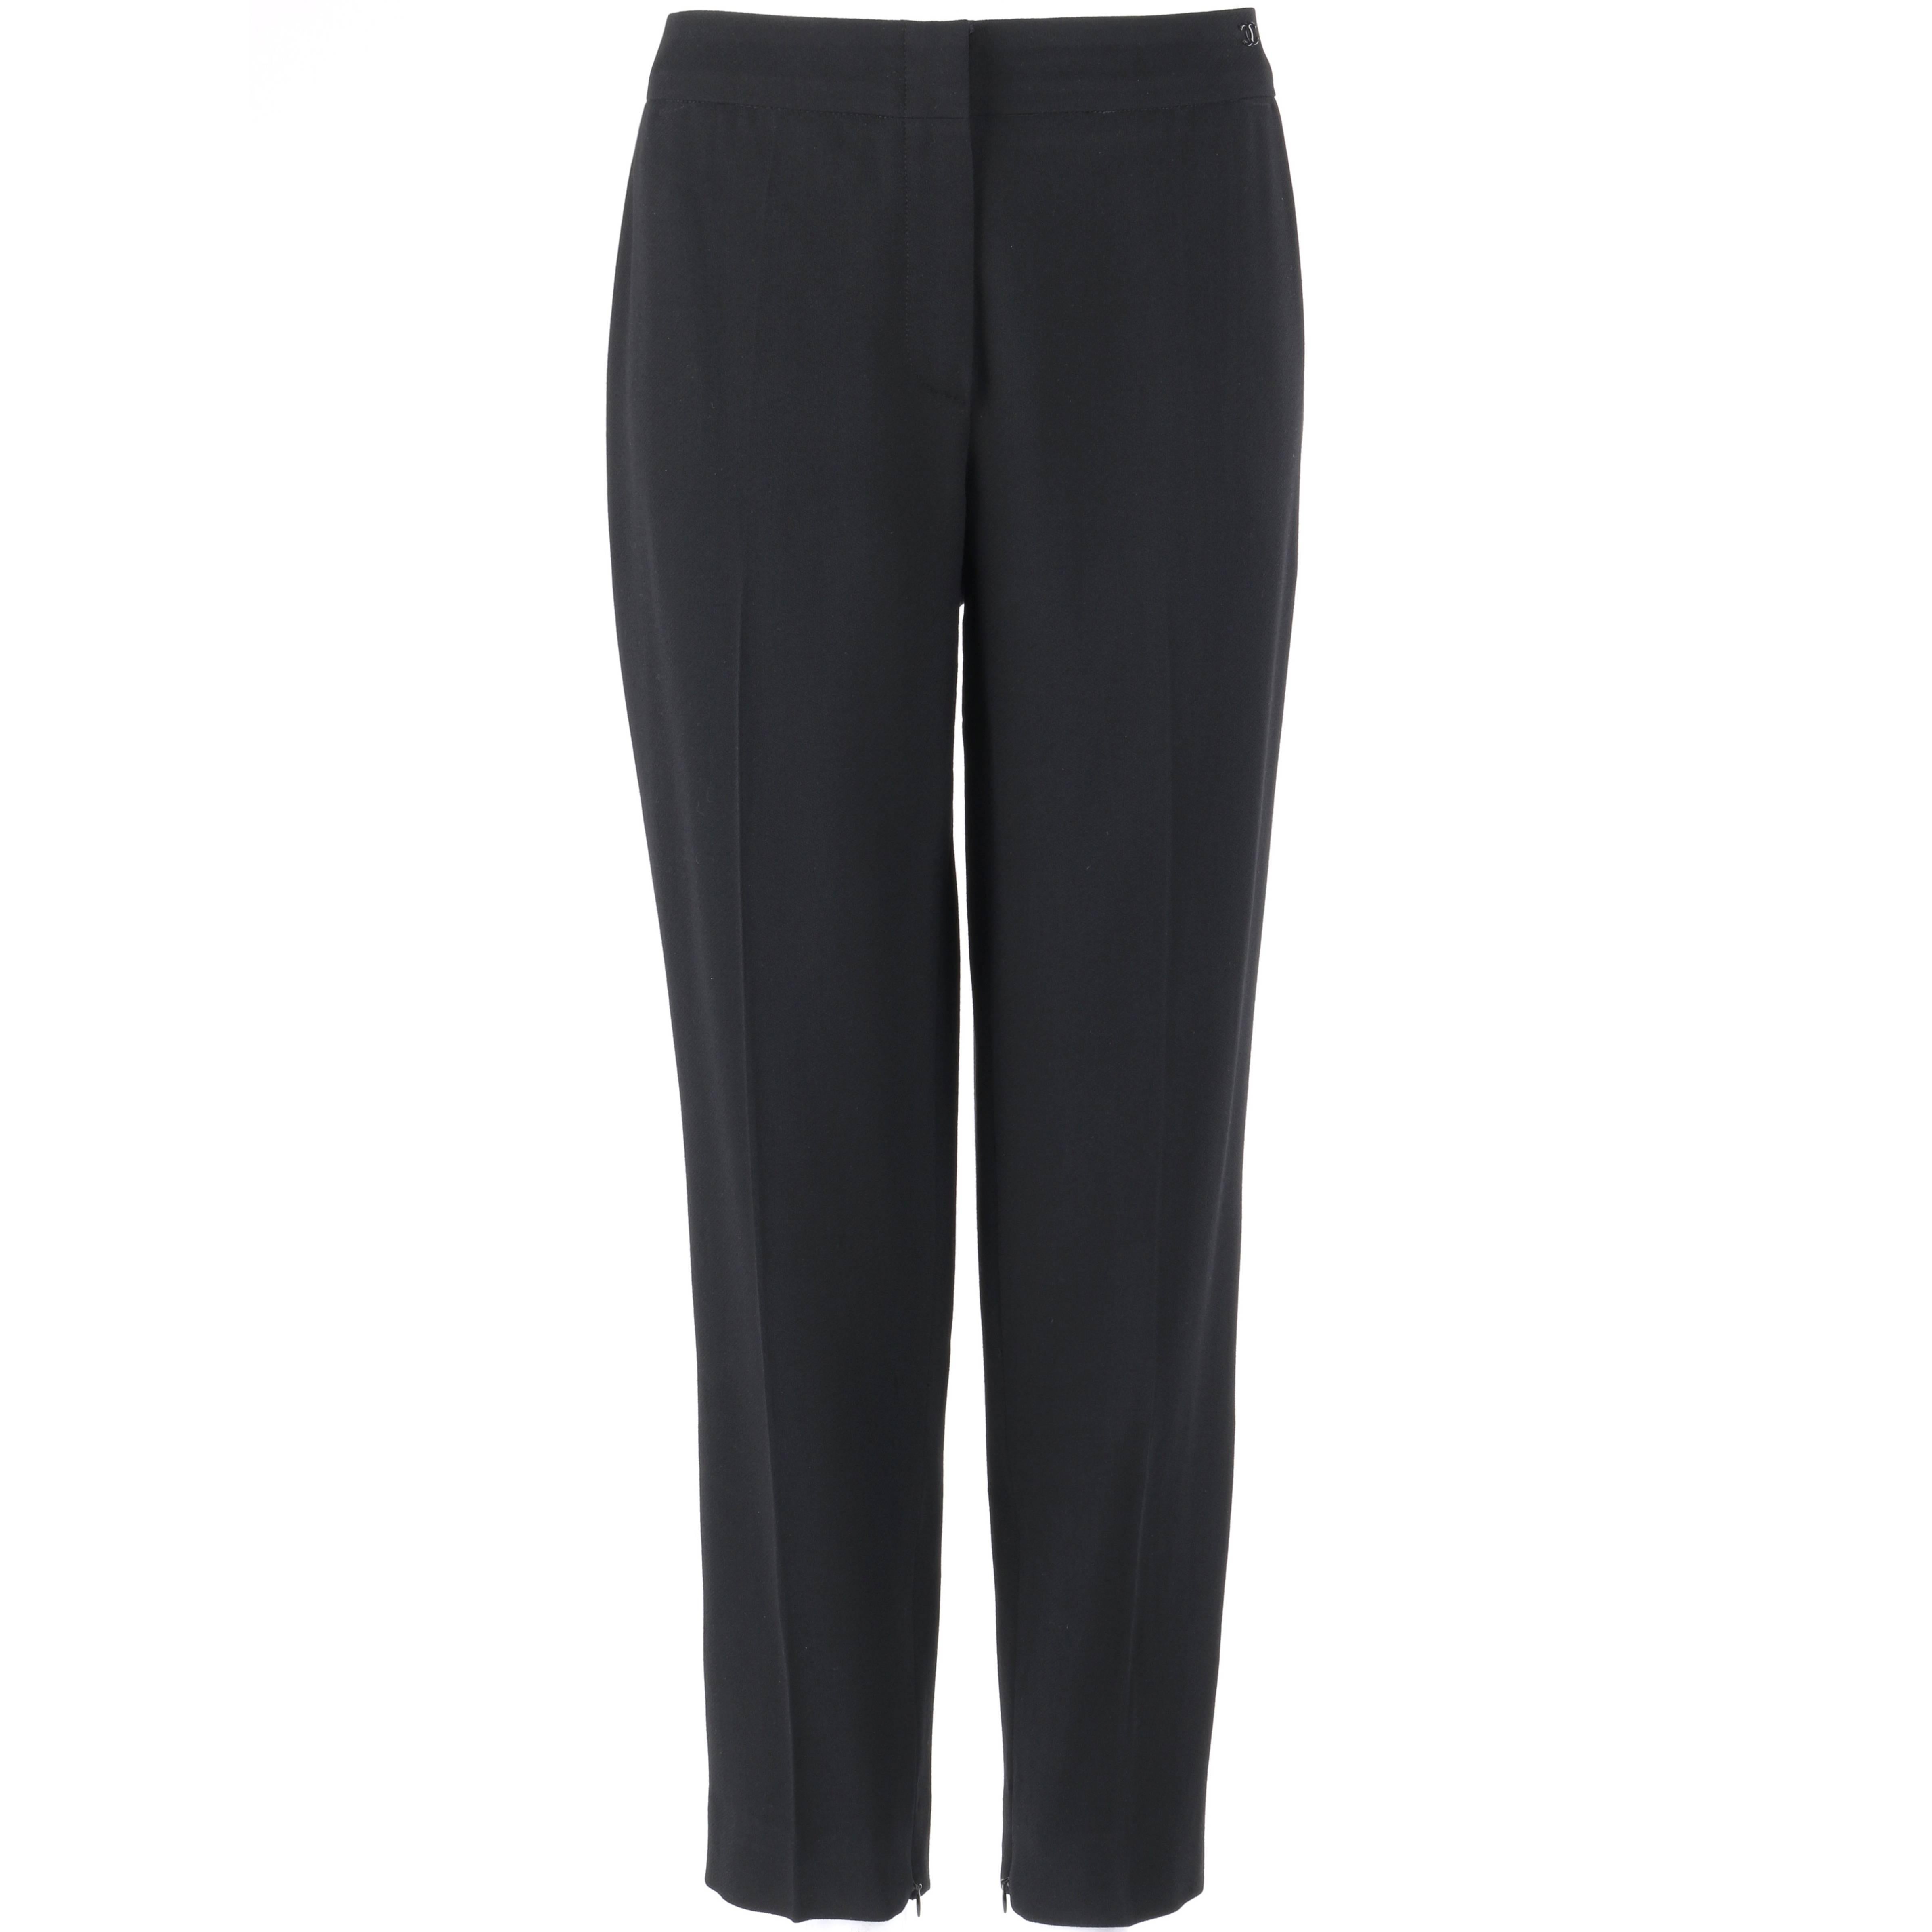 CHANEL S/S 2003 Classic Black Wool Slim Cut Cropped Pants Trousers